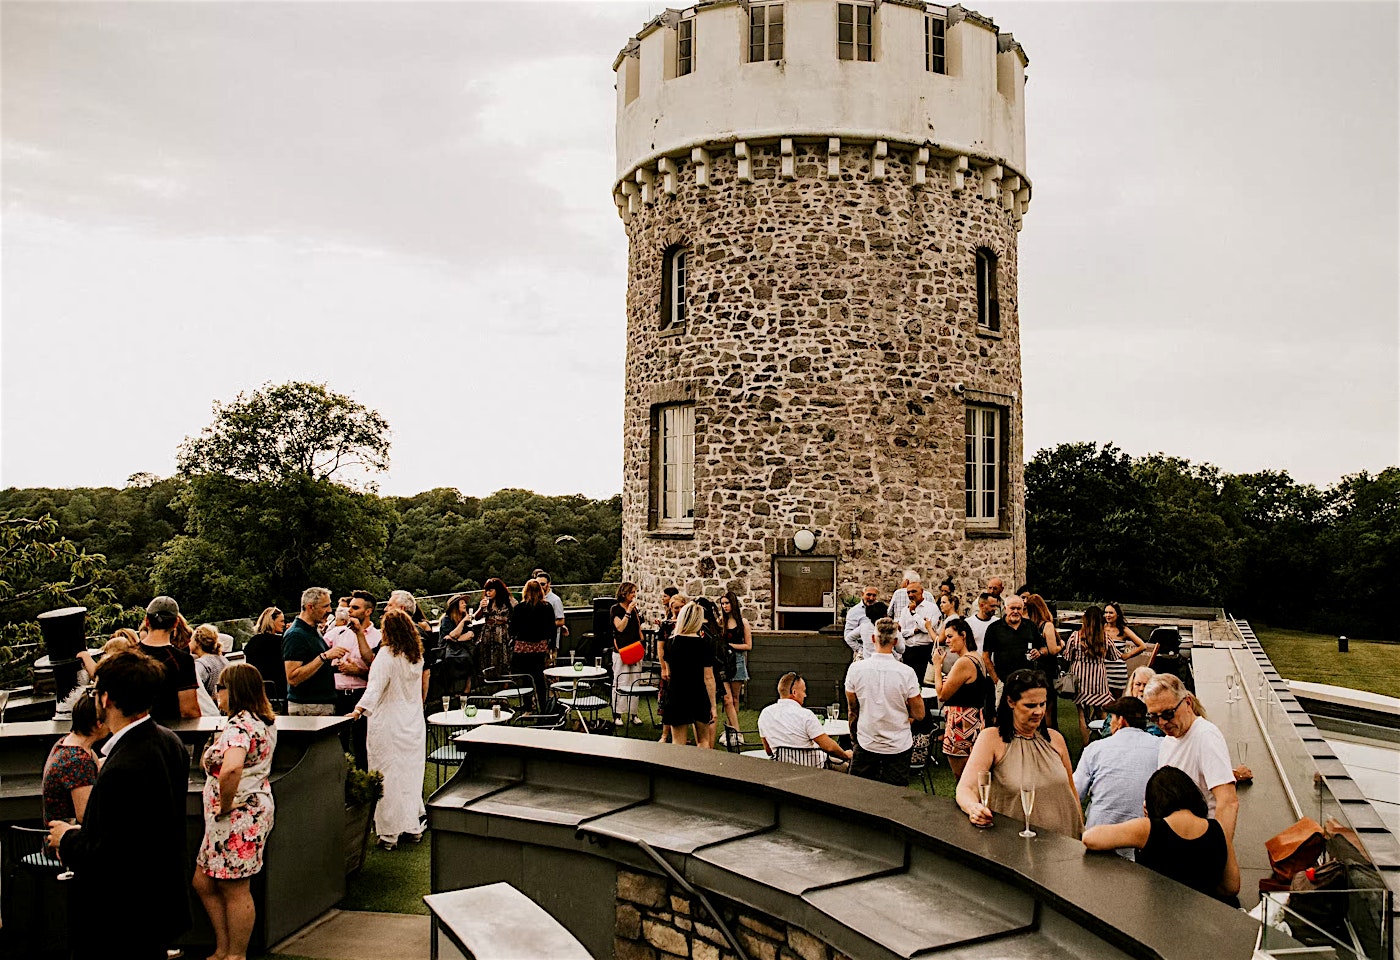 Guests at an event at the Clifton Observatory roof terrace